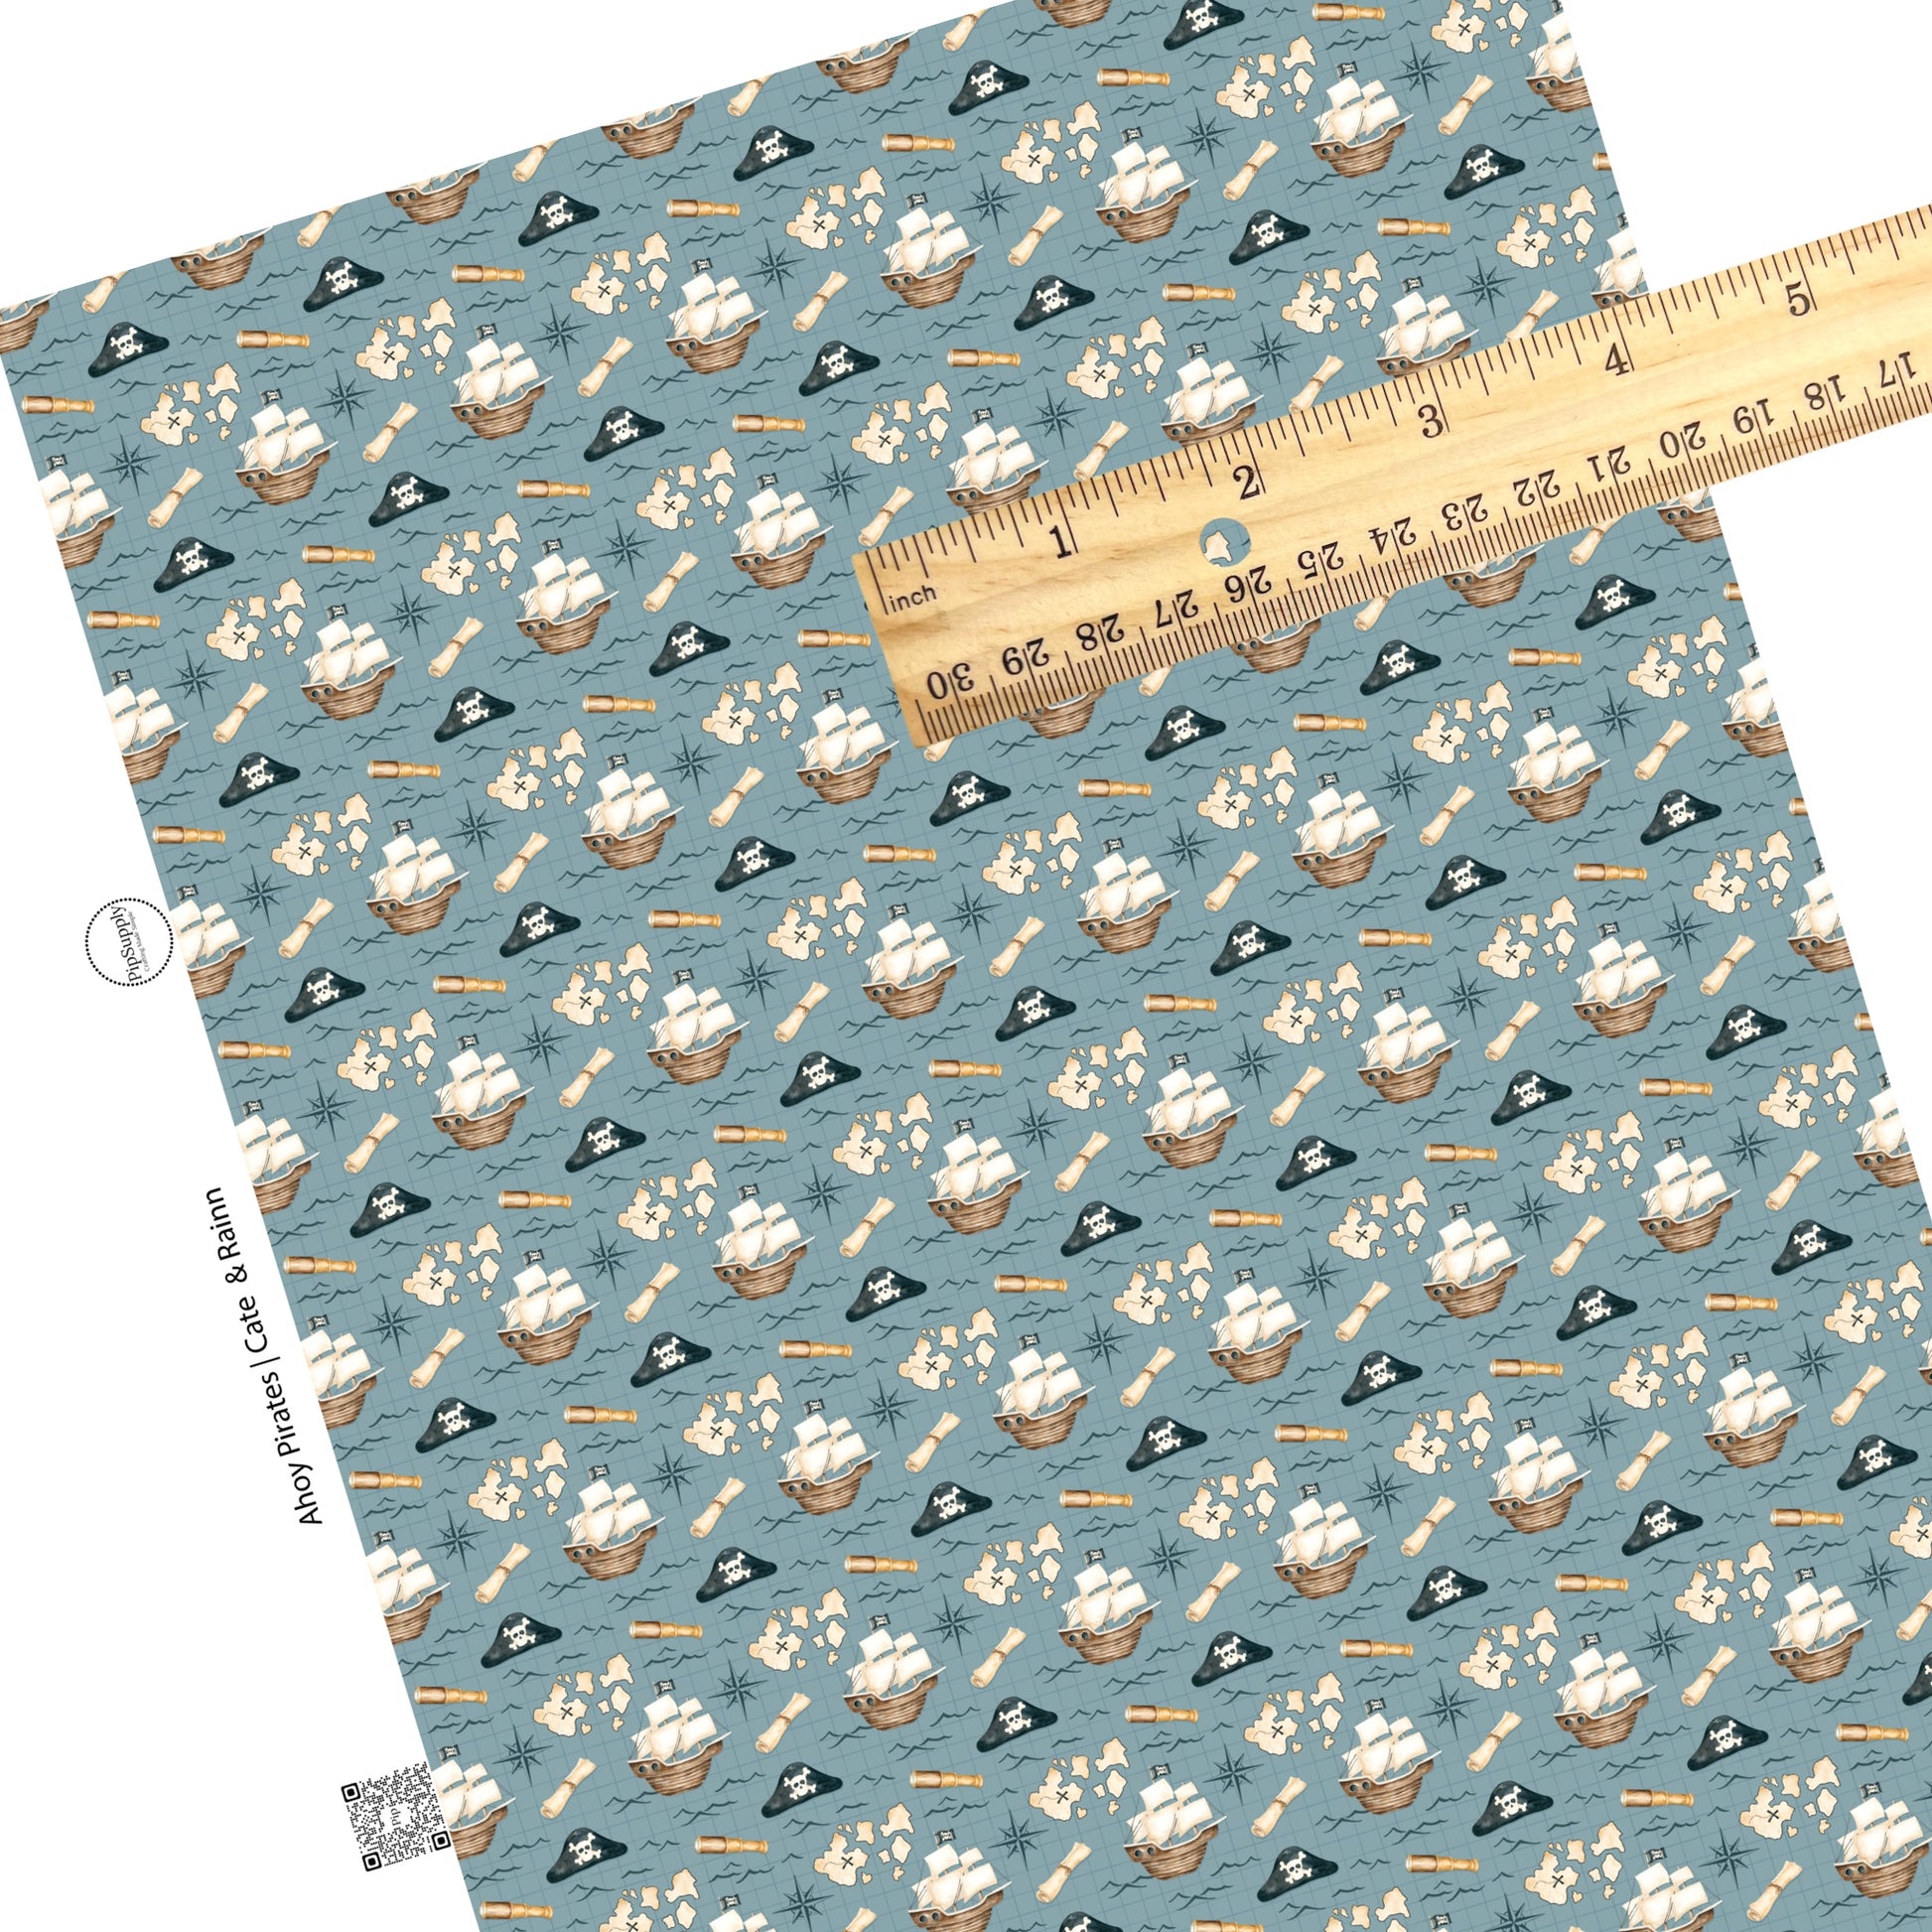 These pirate themed blue faux leather sheets contain the following design elements: pirate ships, treasure maps, compasses, crossbones and skulls on dark blue. Our CPSIA compliant faux leather sheets or rolls can be used for all types of crafting projects.